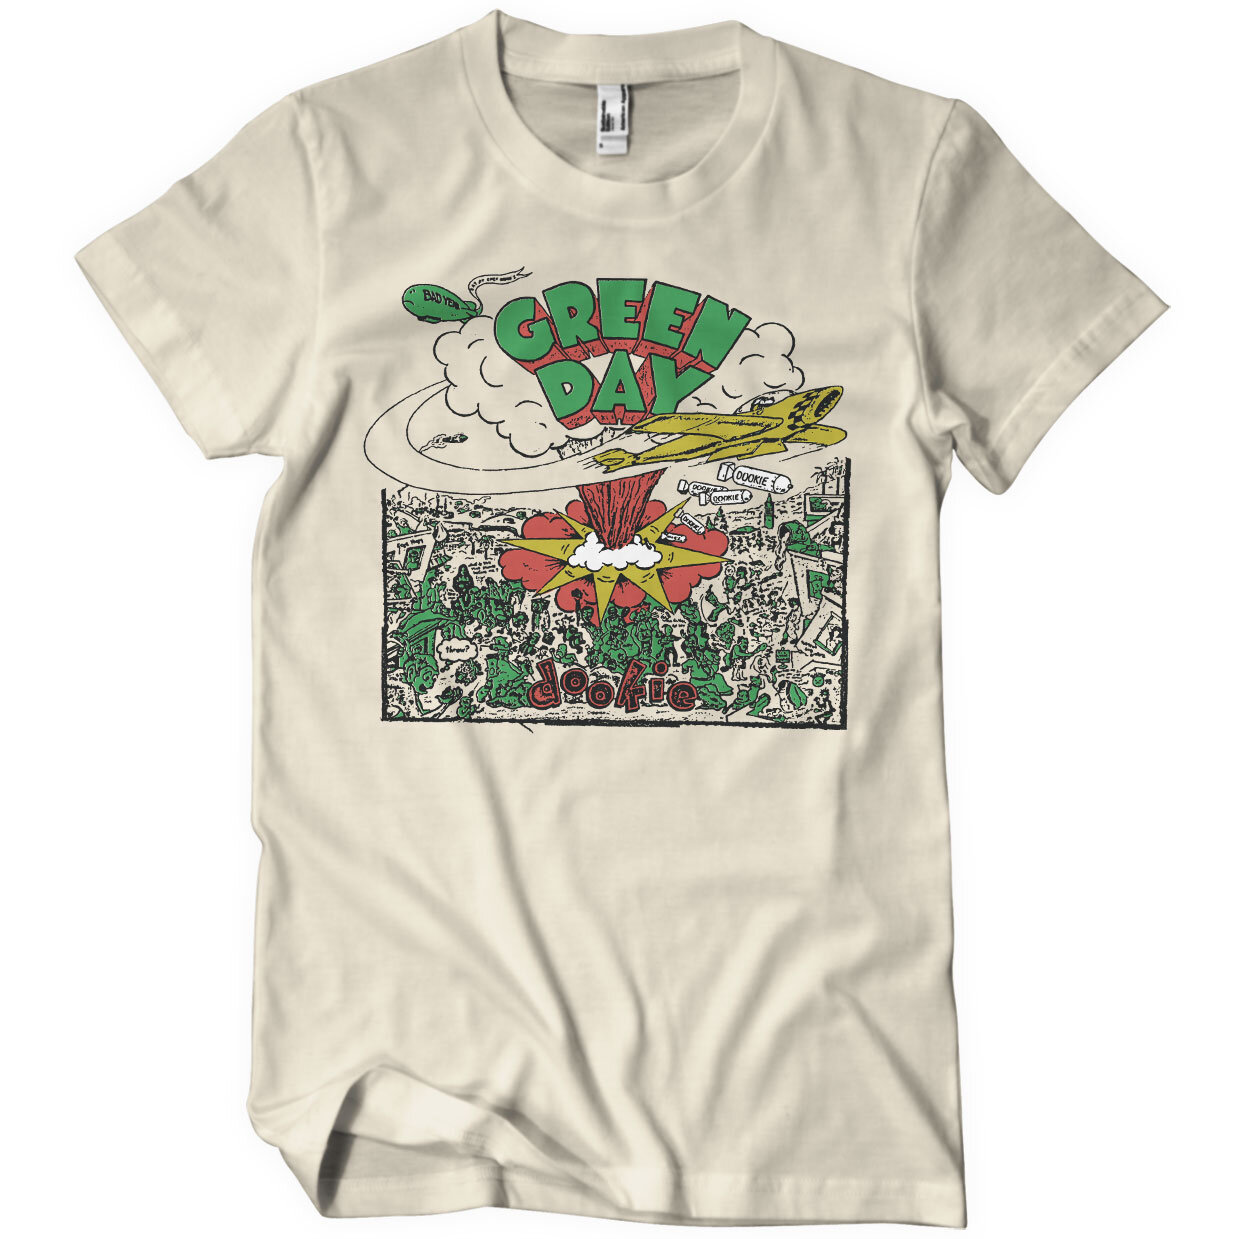 Green Day Dookie Doodle T-Shirt